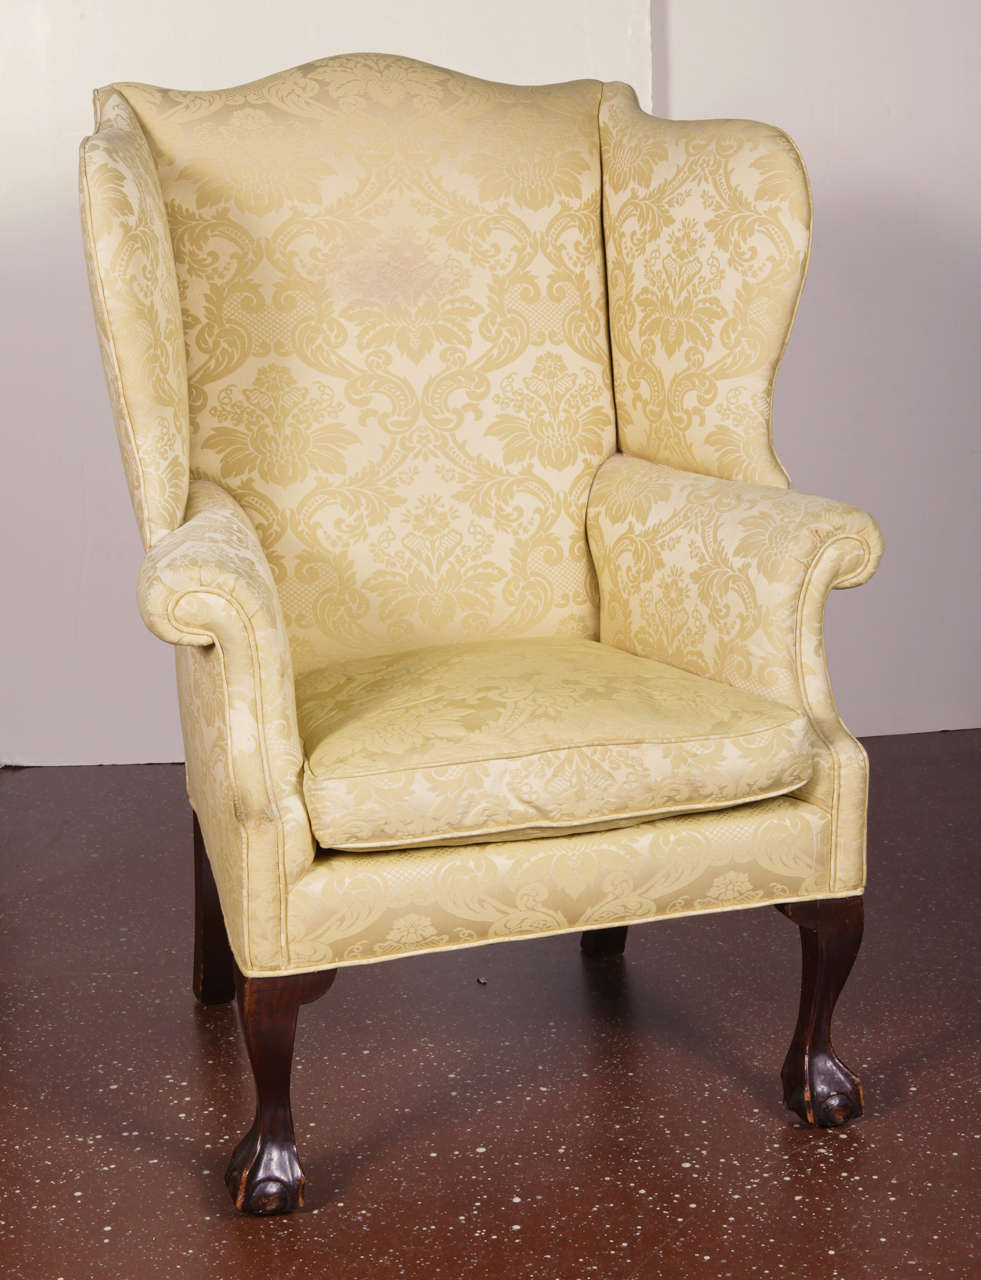 American Queen Anne style wing back armchair with cream damask upholstered back, arms & seat, cabriole legs with webbed ball and claw feet.  Circa 19th c.